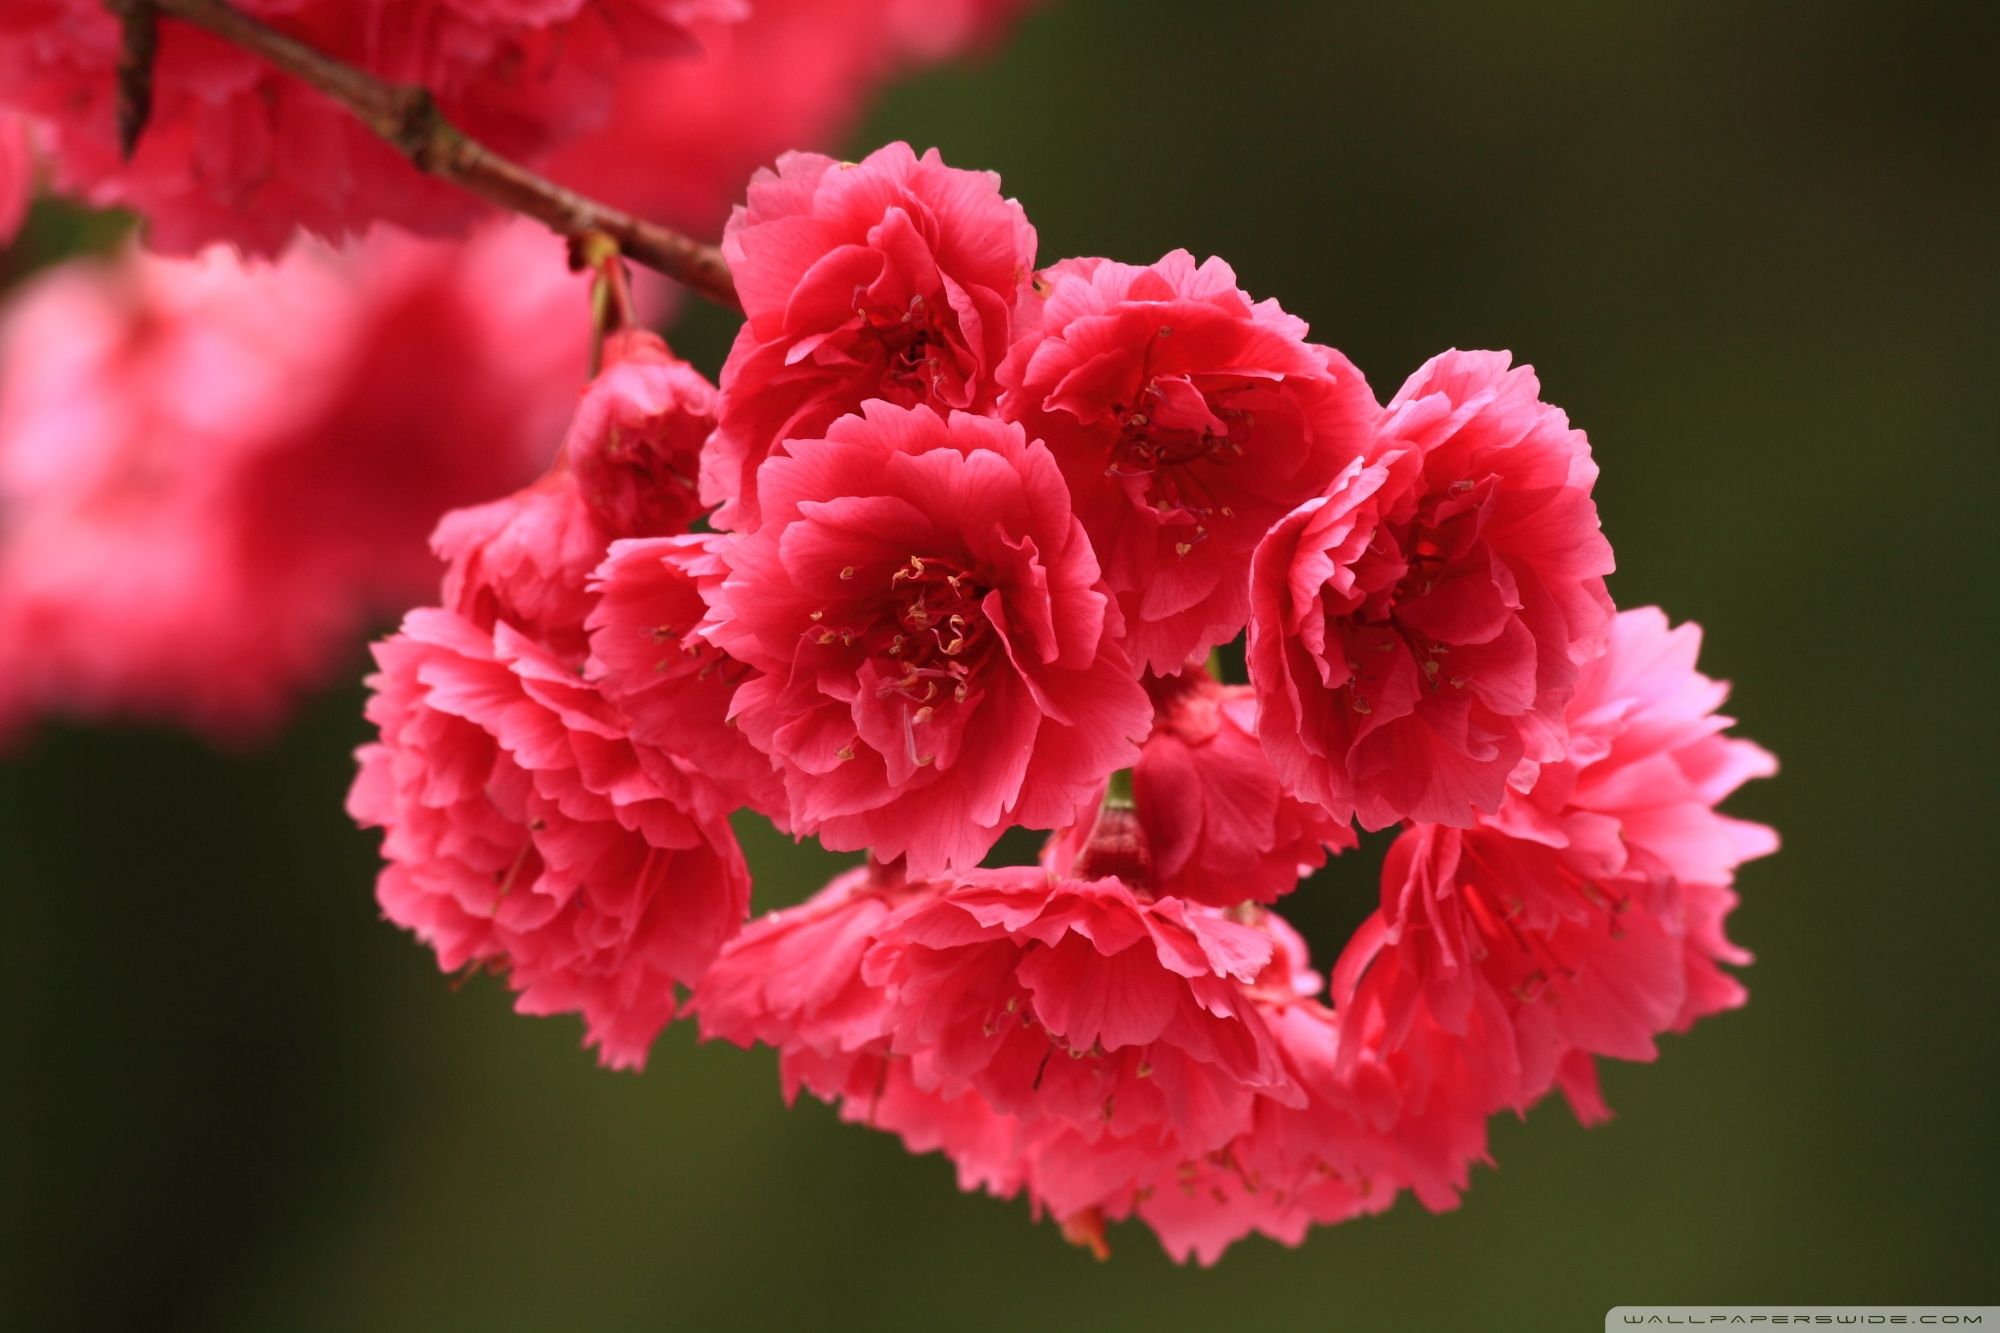 Beautiful Spring Flowers Images, Pictures and Wallpapers | Flower ...